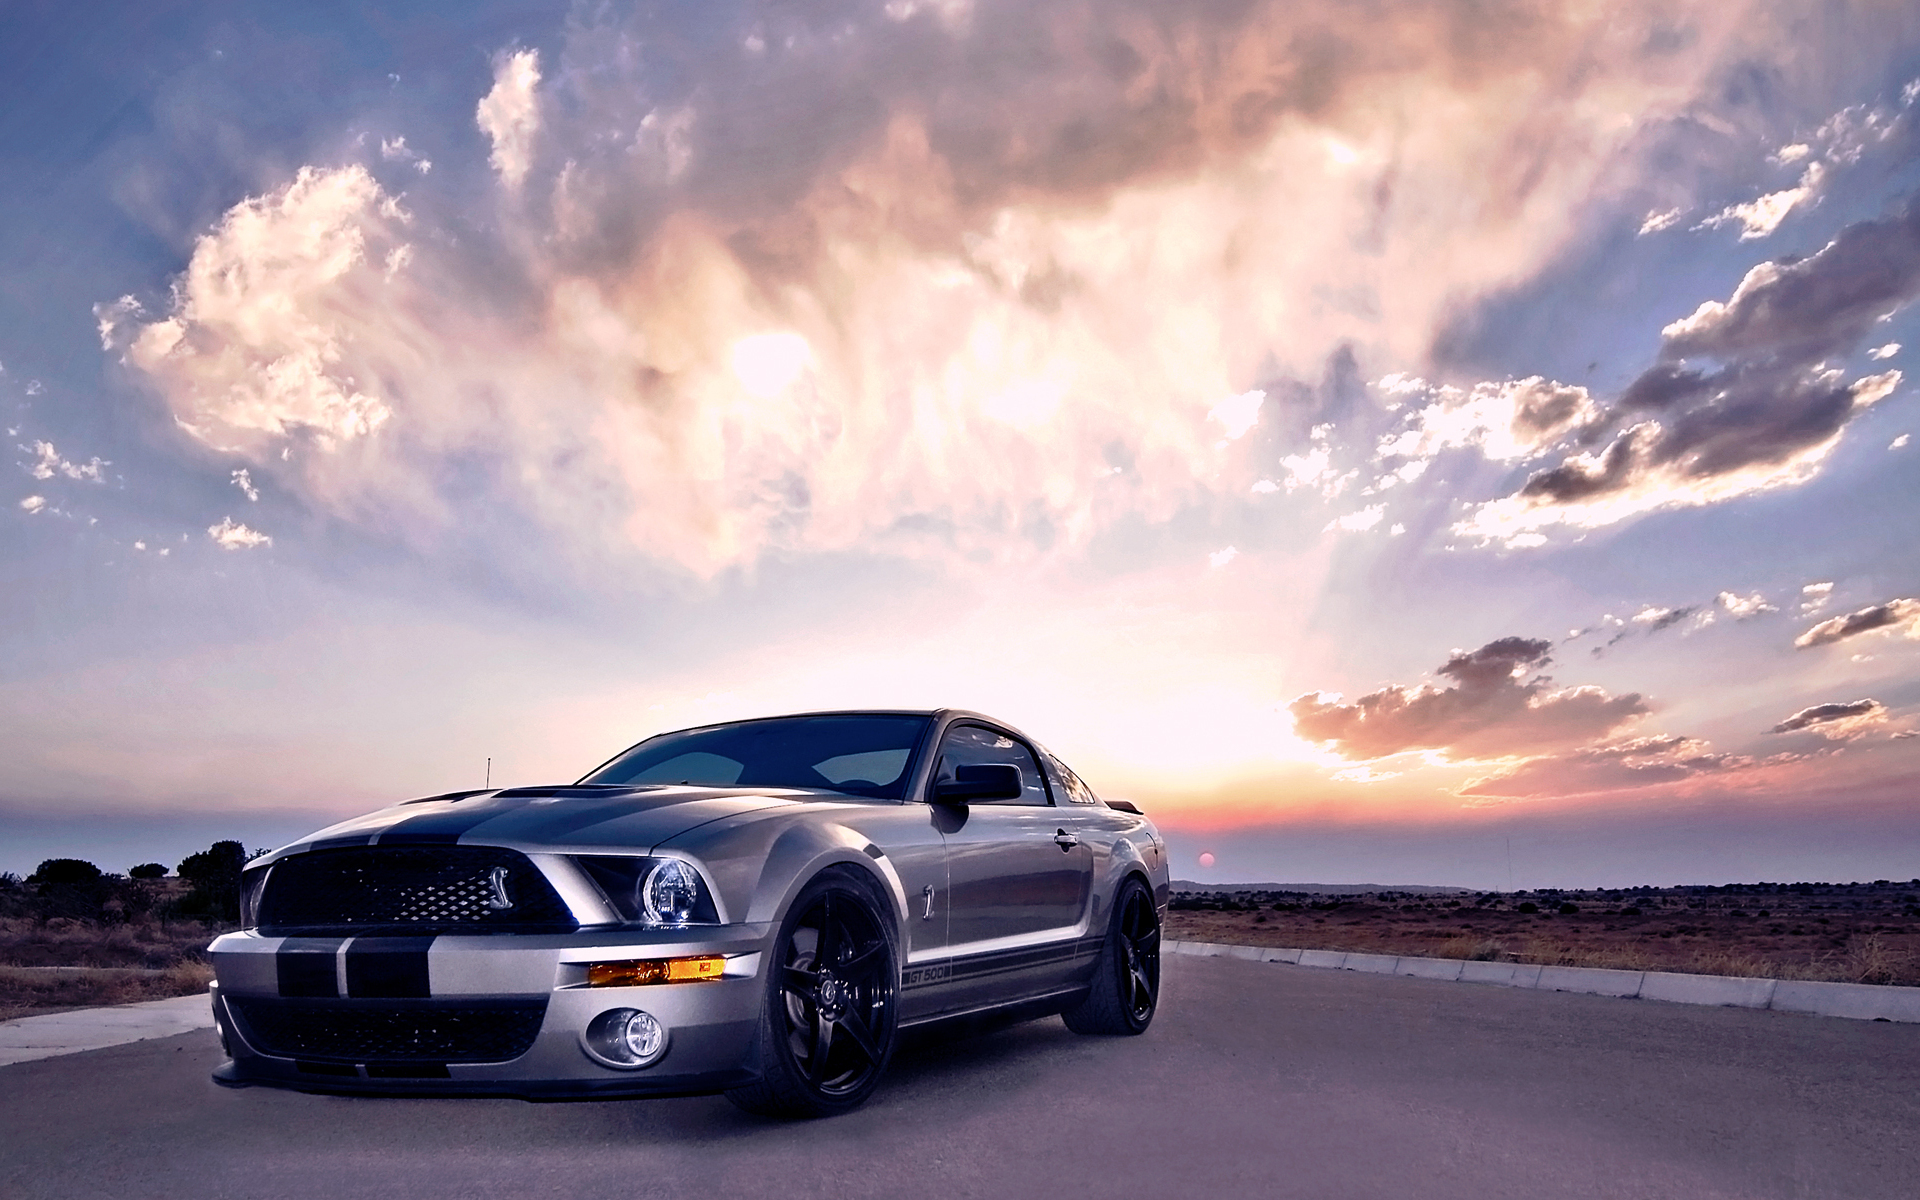 Shelby Cobra Wallpaper Android Phone - Ford Mustang Cobra Wallpaper Hd -  1920x1200 Wallpaper 